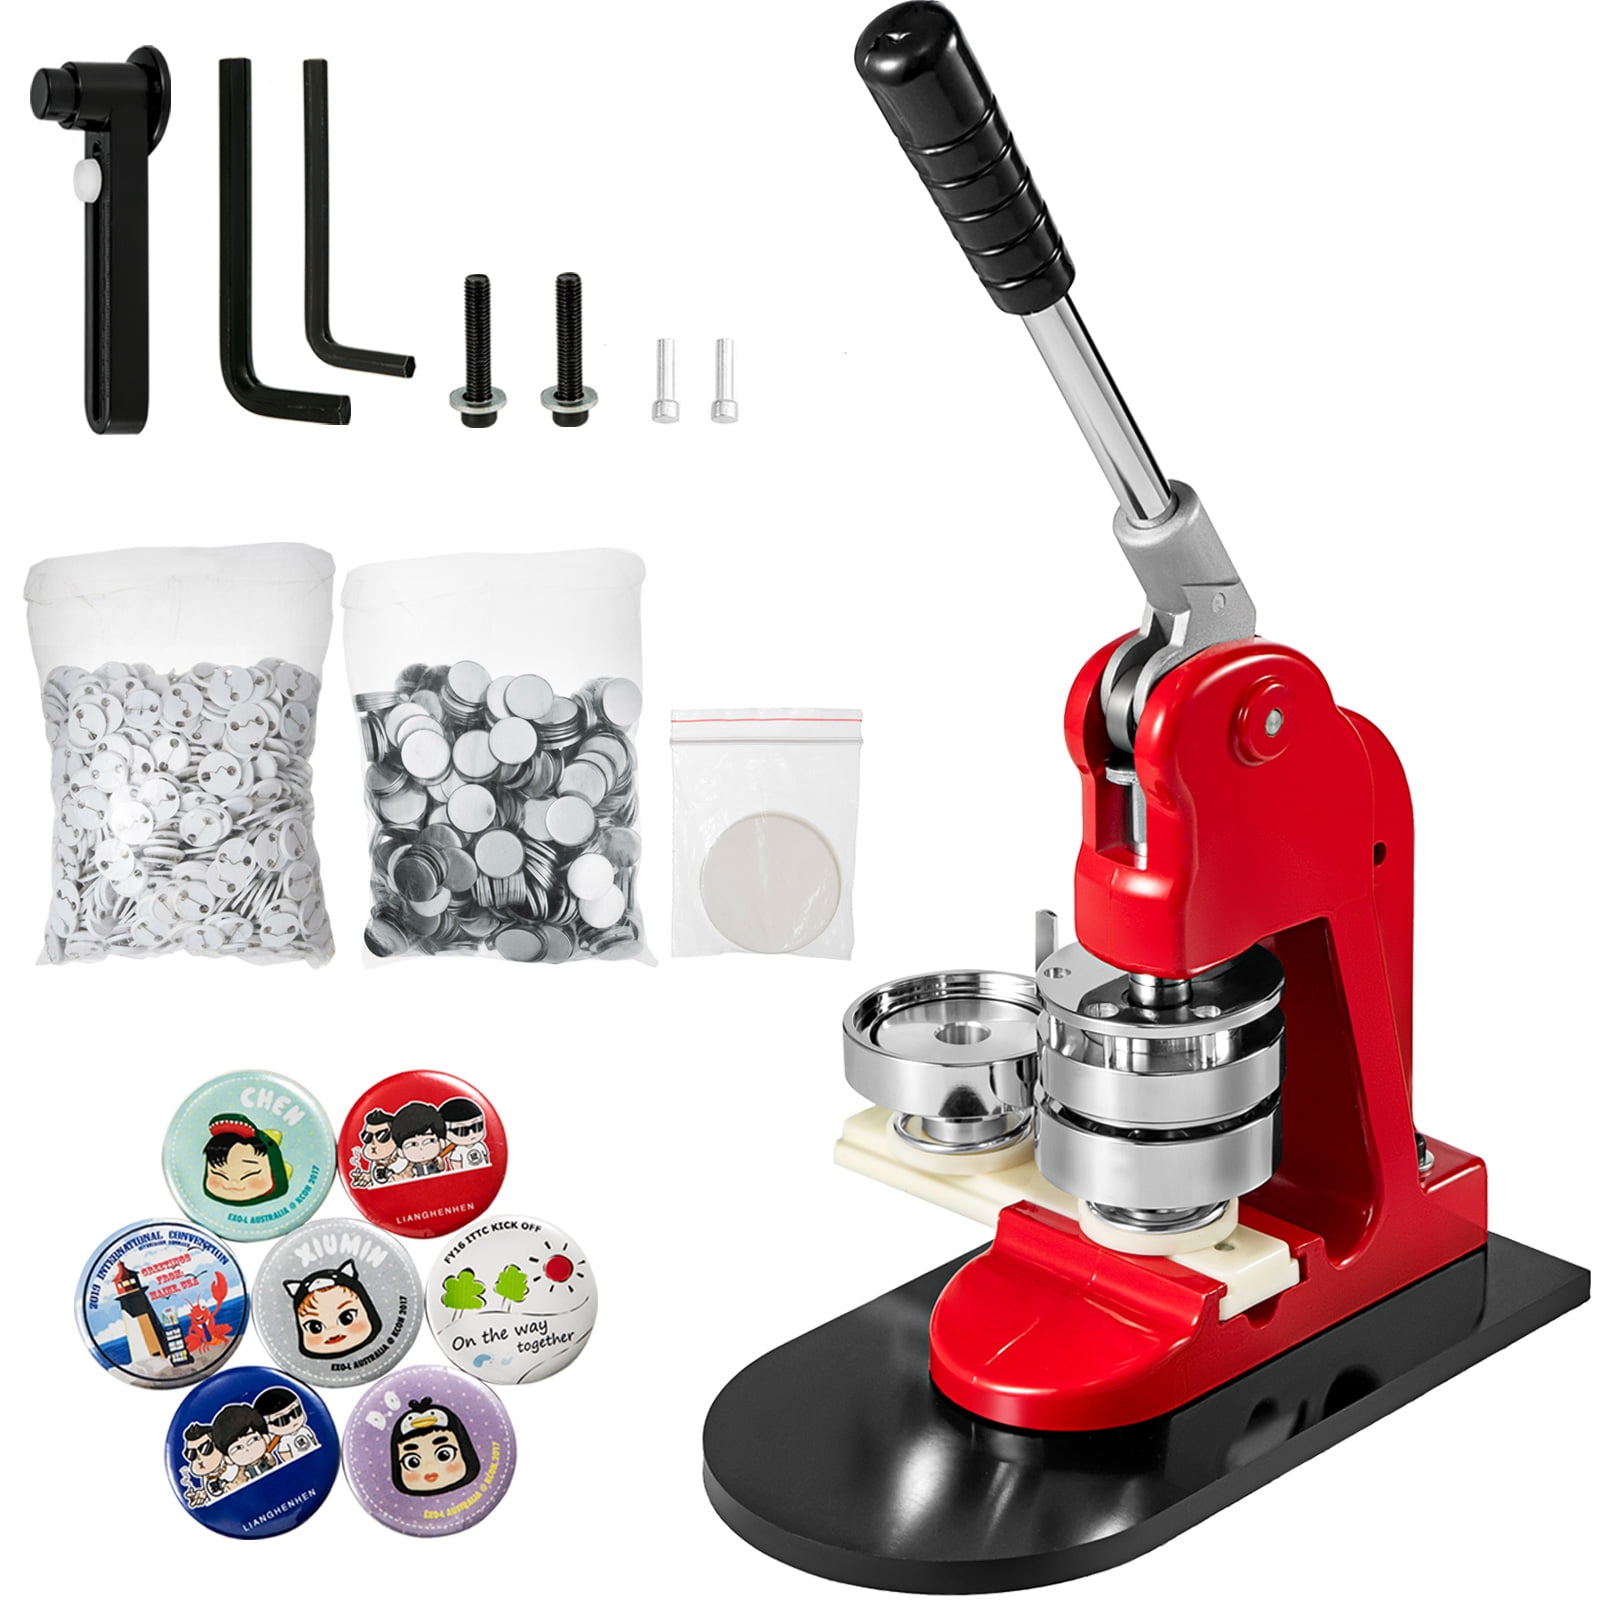 VEVORbrand Button Maker 3 inch 75 mm Button Badge Maker Punch Press Machine with 500 Pcs Circle Button Parts and Circle Cutter, Red